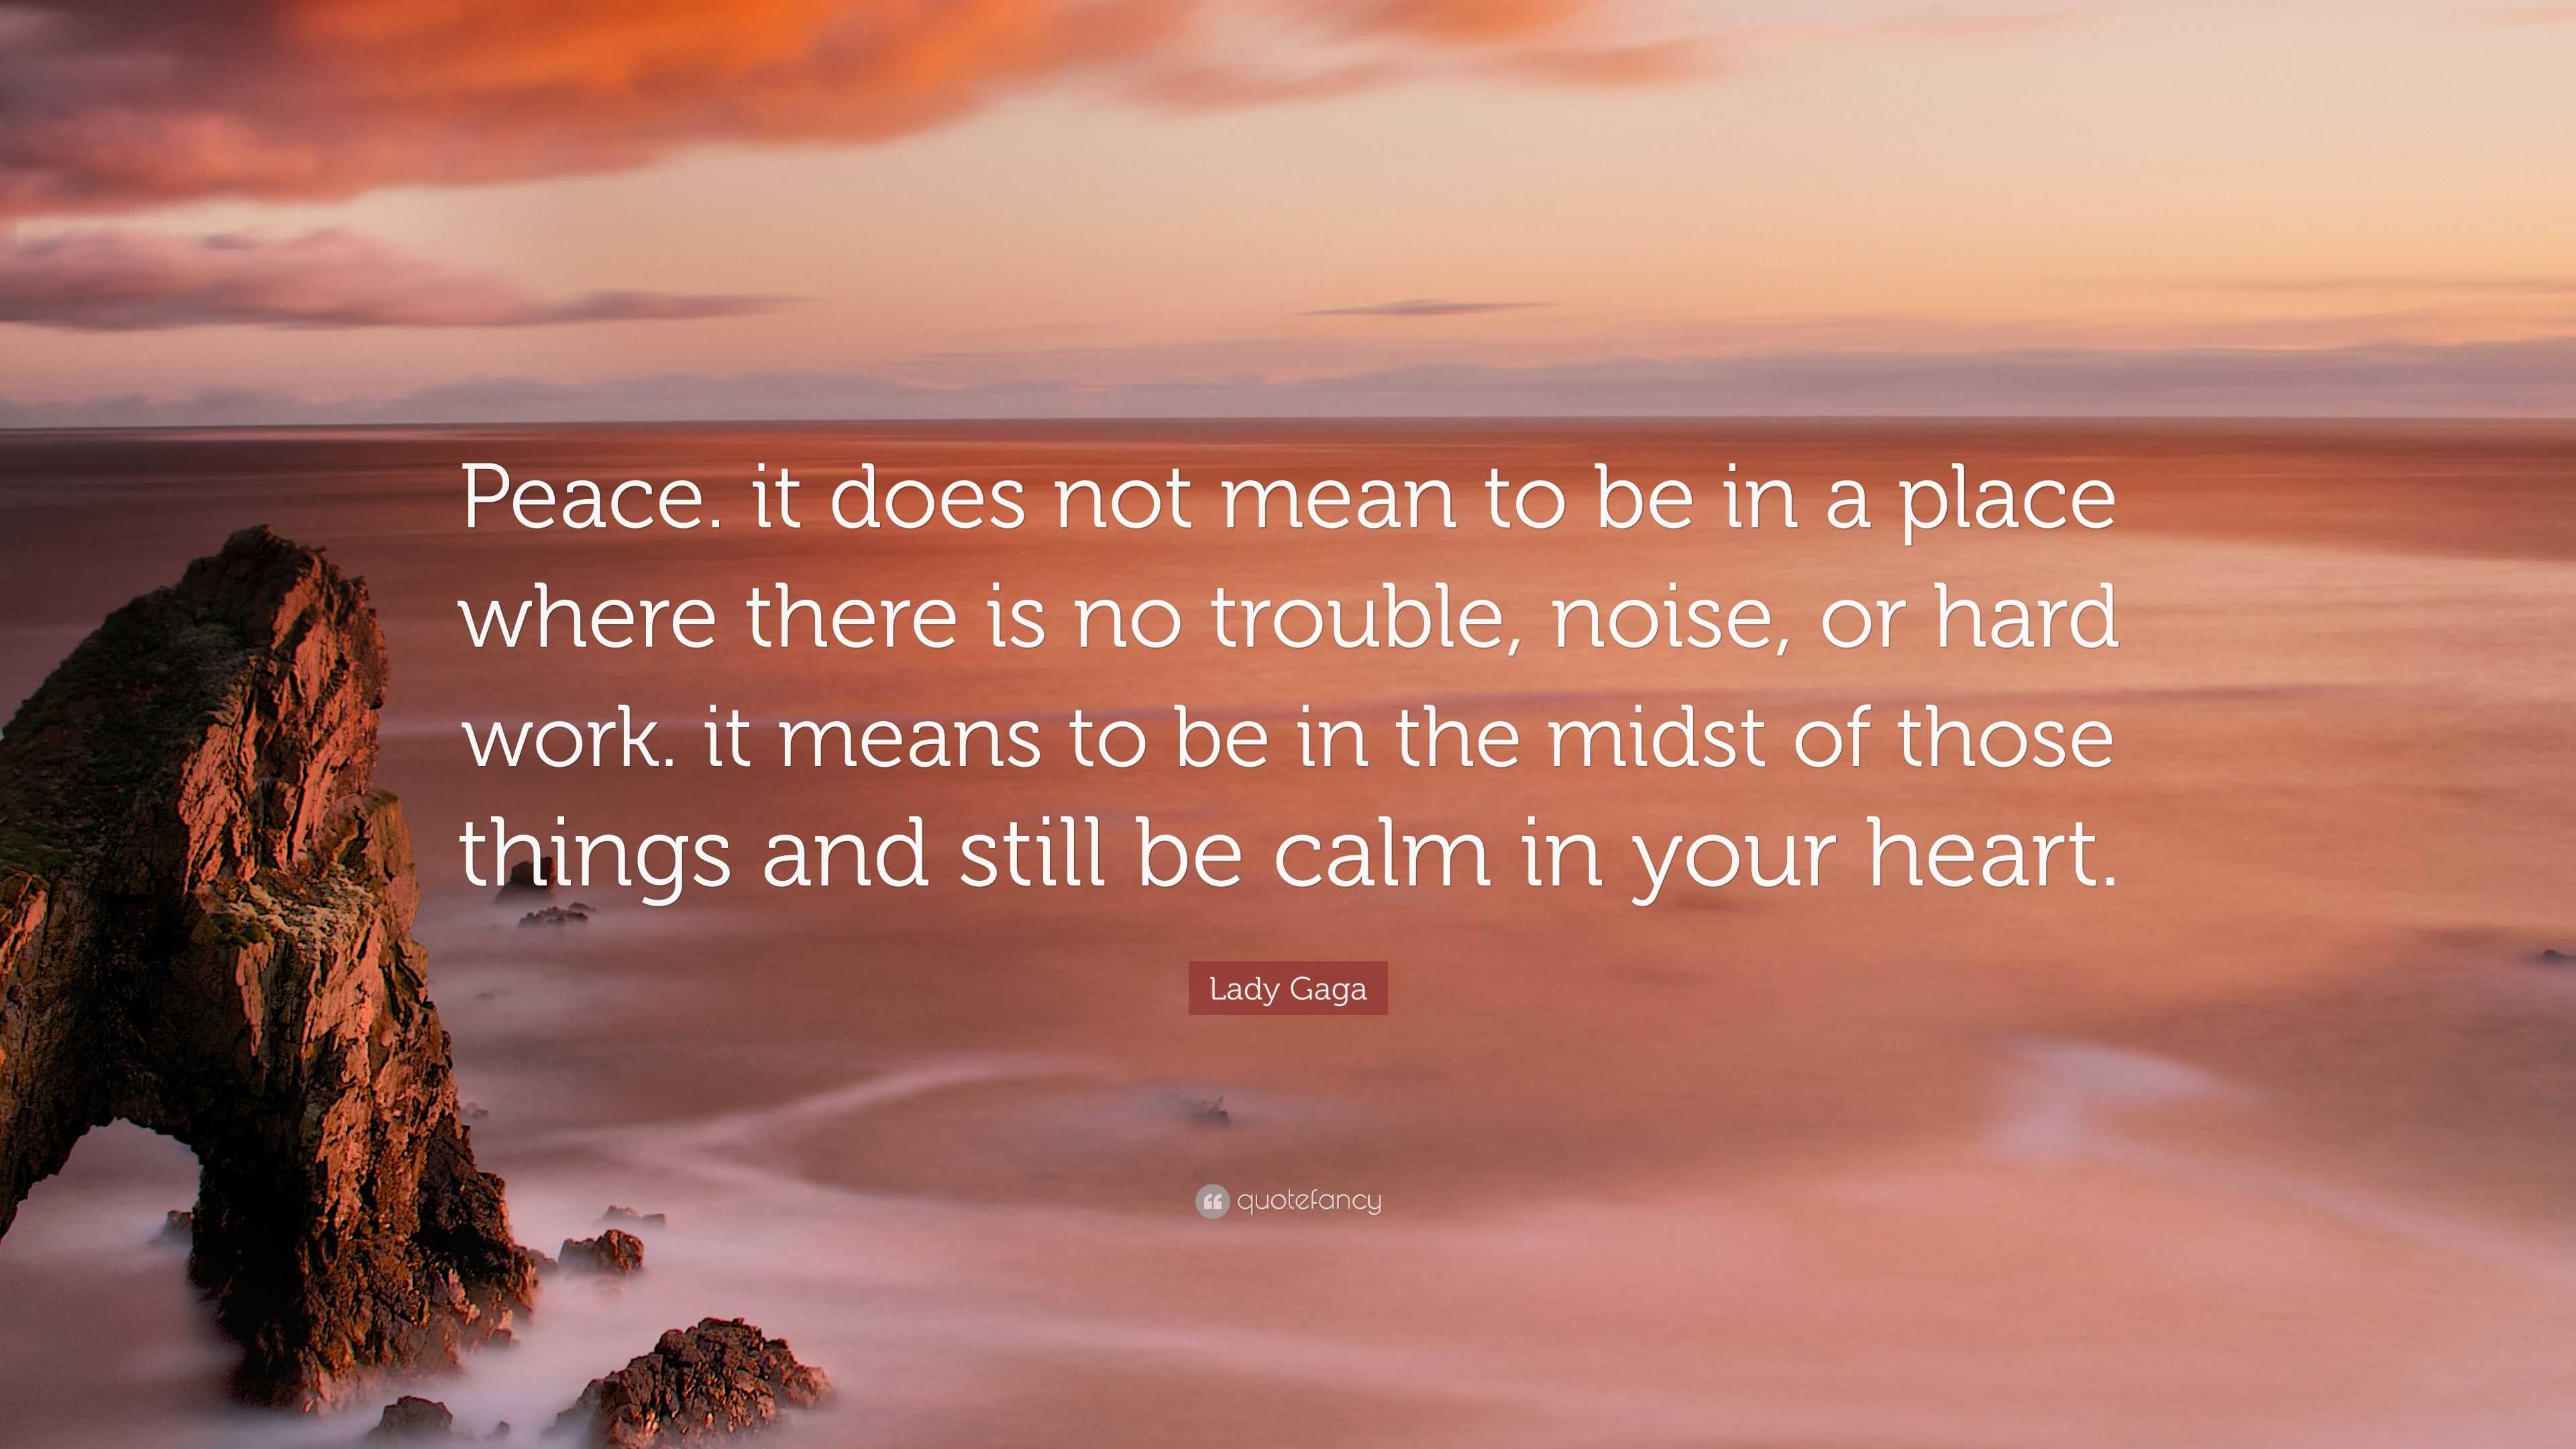 Lady Gaga Quote: “Peace. it does not mean to be in a place where there